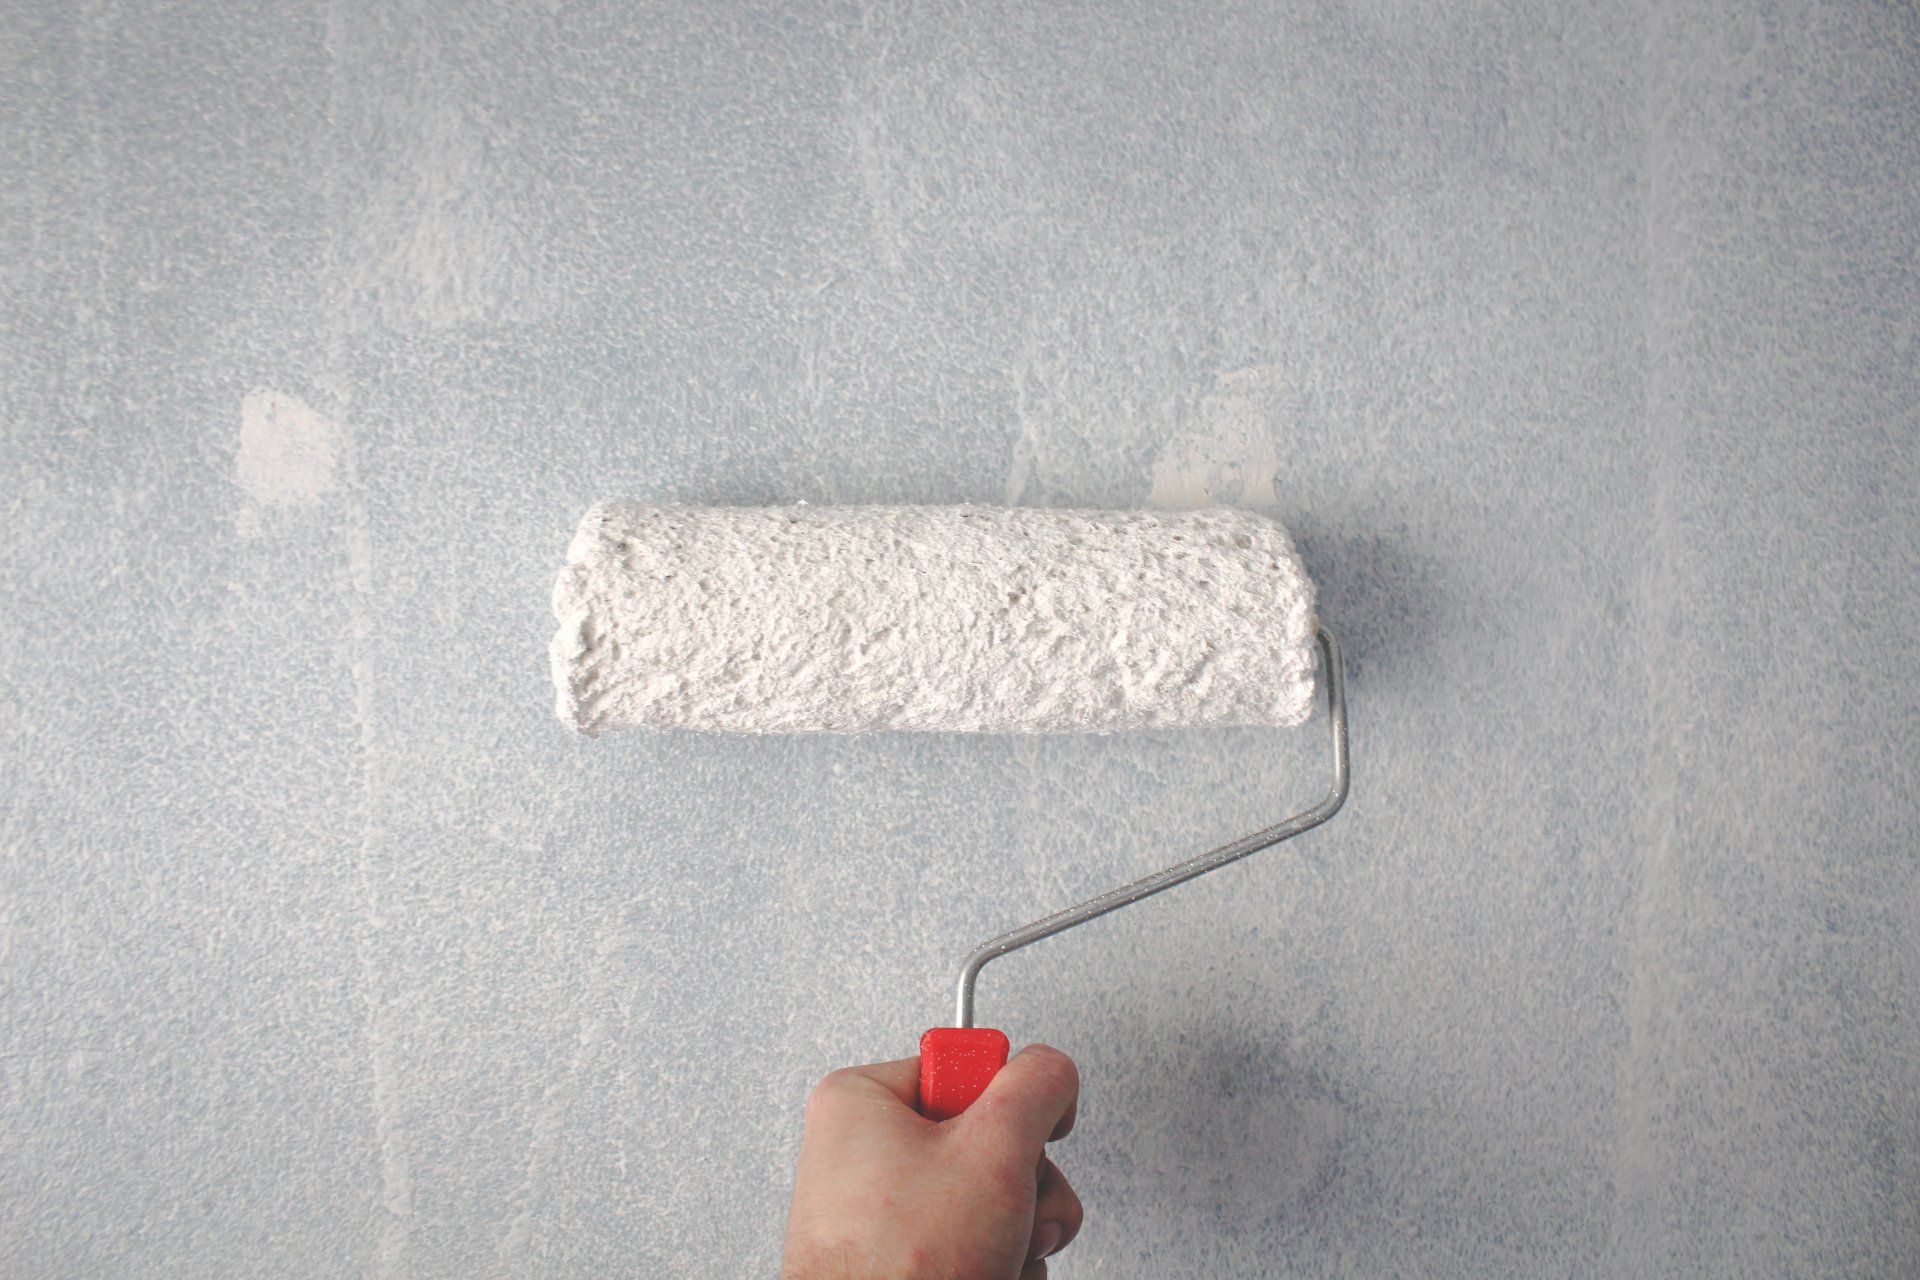 painting a wall using a roller